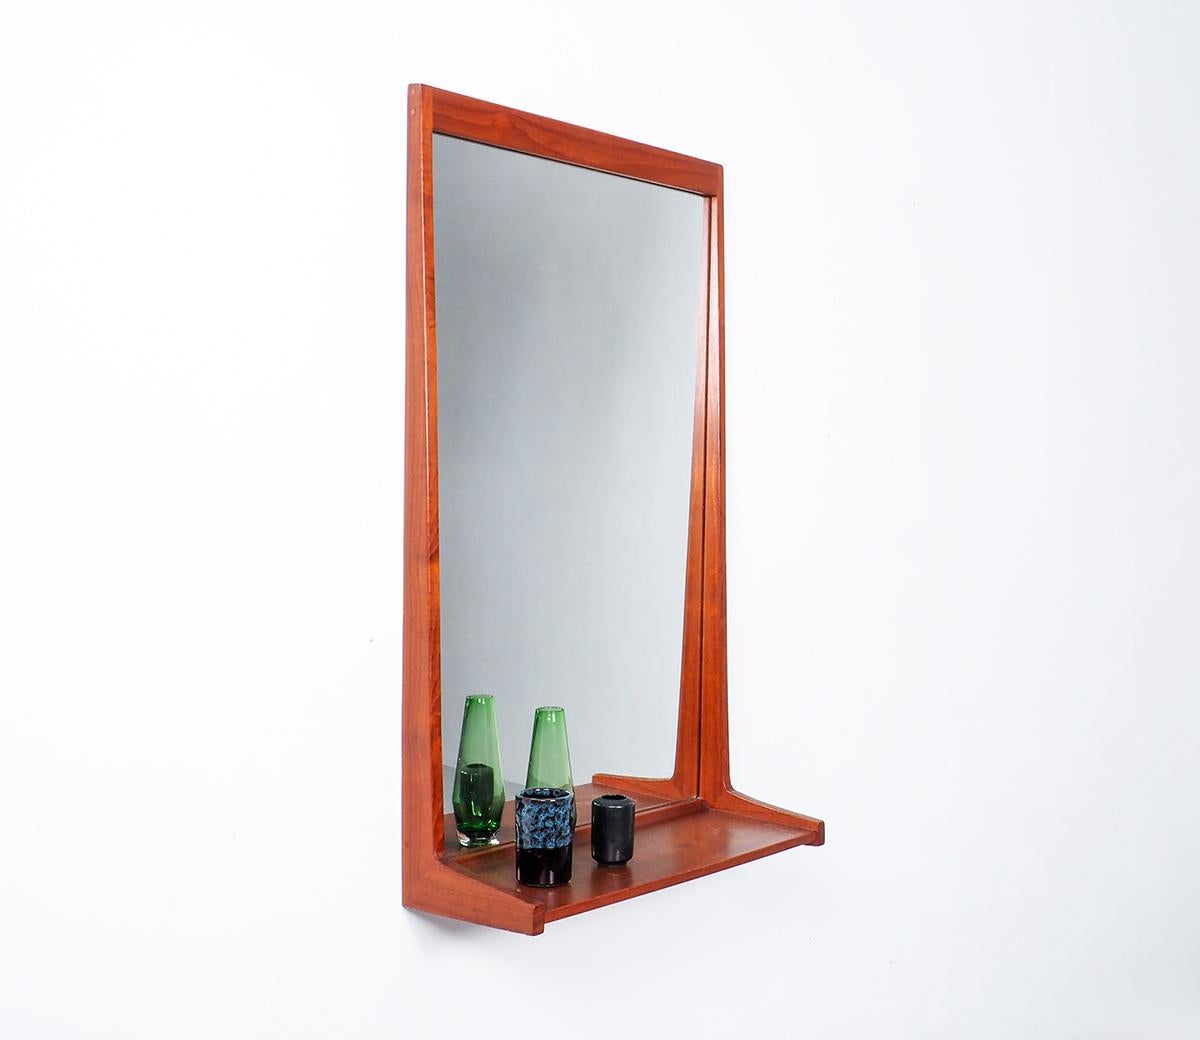 A teak wall mirror designed by Kai Kristiansen in the 1950's. Produced by Aksel kjersgaard, model 180. A mirror with a teak frame featuring a small shelf. 